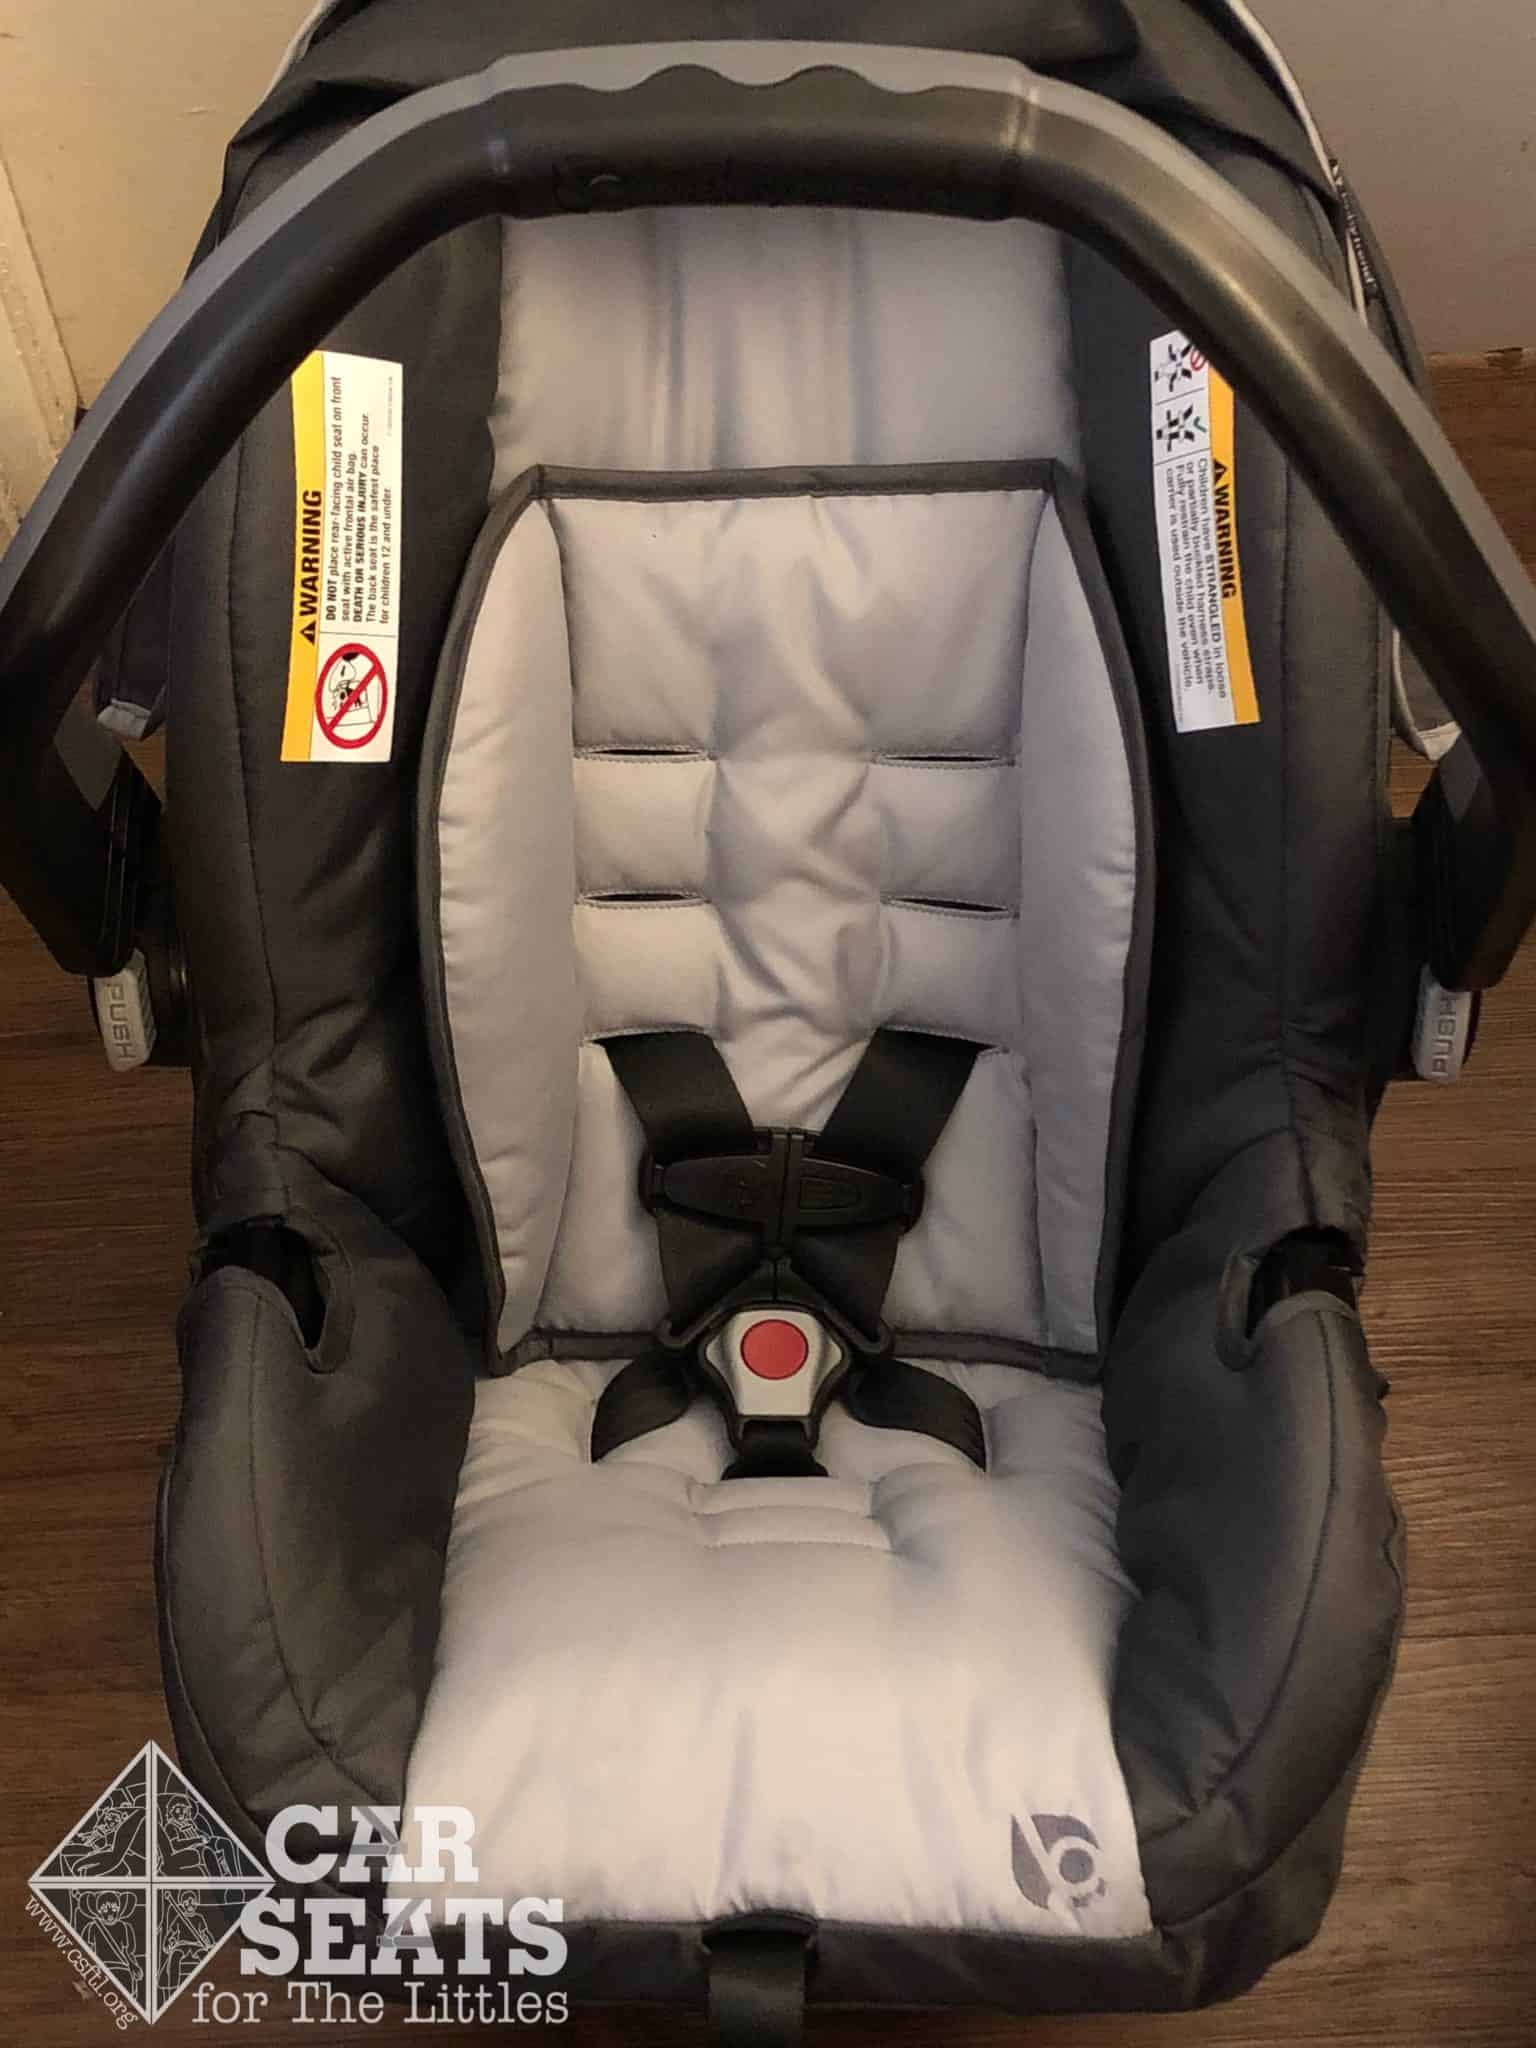 How to Loosen Straps on Baby Trend Car Seat: Quick Guide